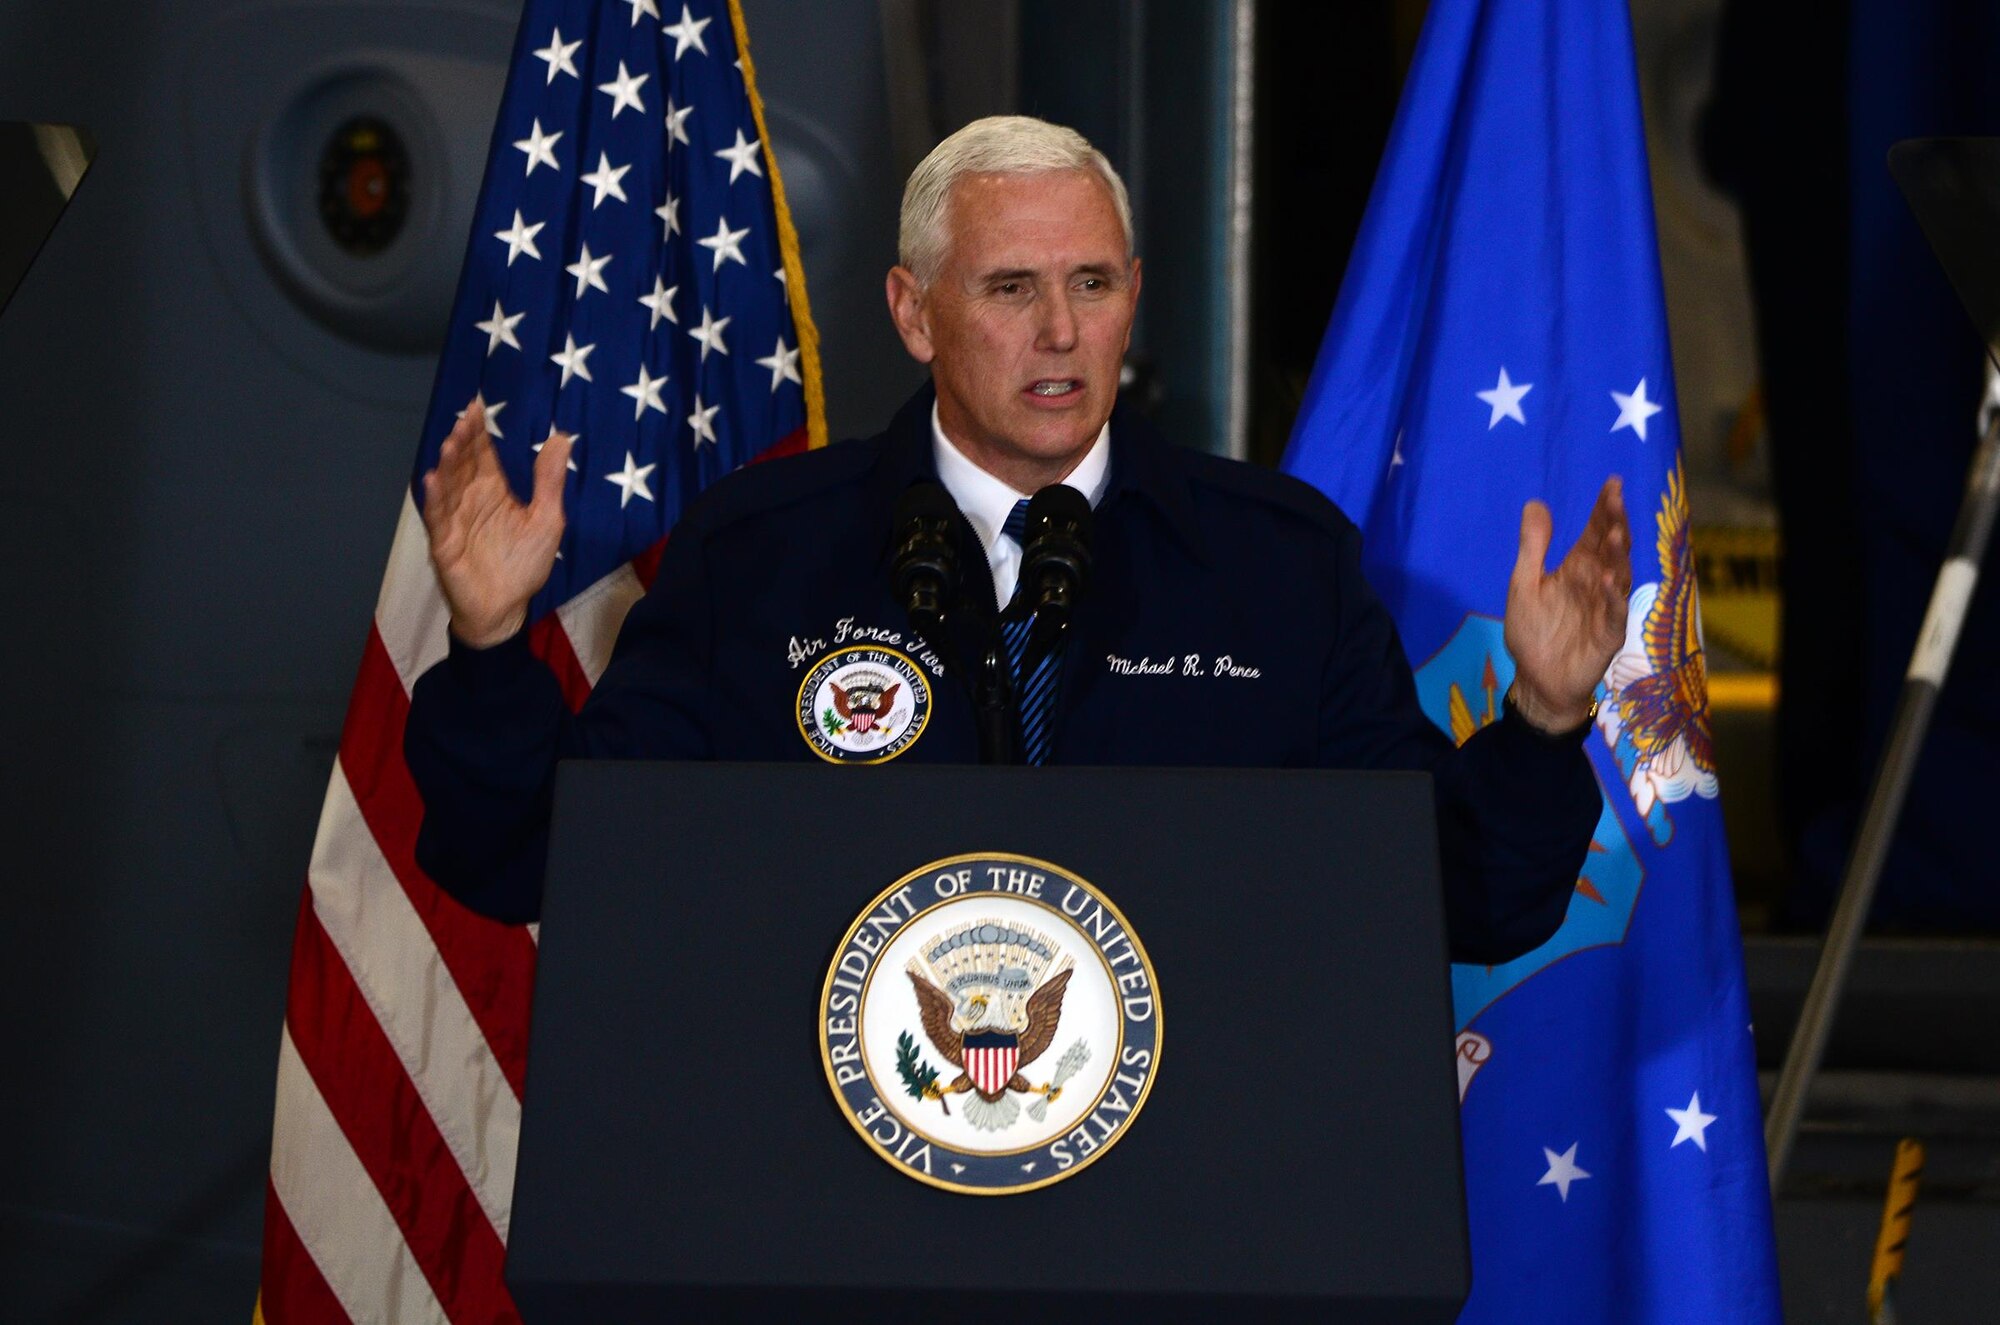 Vice President Mike Pence speaks to a crowd of approximately 250 Airmen and families inside a 445th Airlift Wing hangar Saturday, May 20, 2017. The vice president visited Wright-Patterson Air Force Base to commemorate Armed Forces Day. (U.S. Air Force photo/Tech. Anthony Springer)